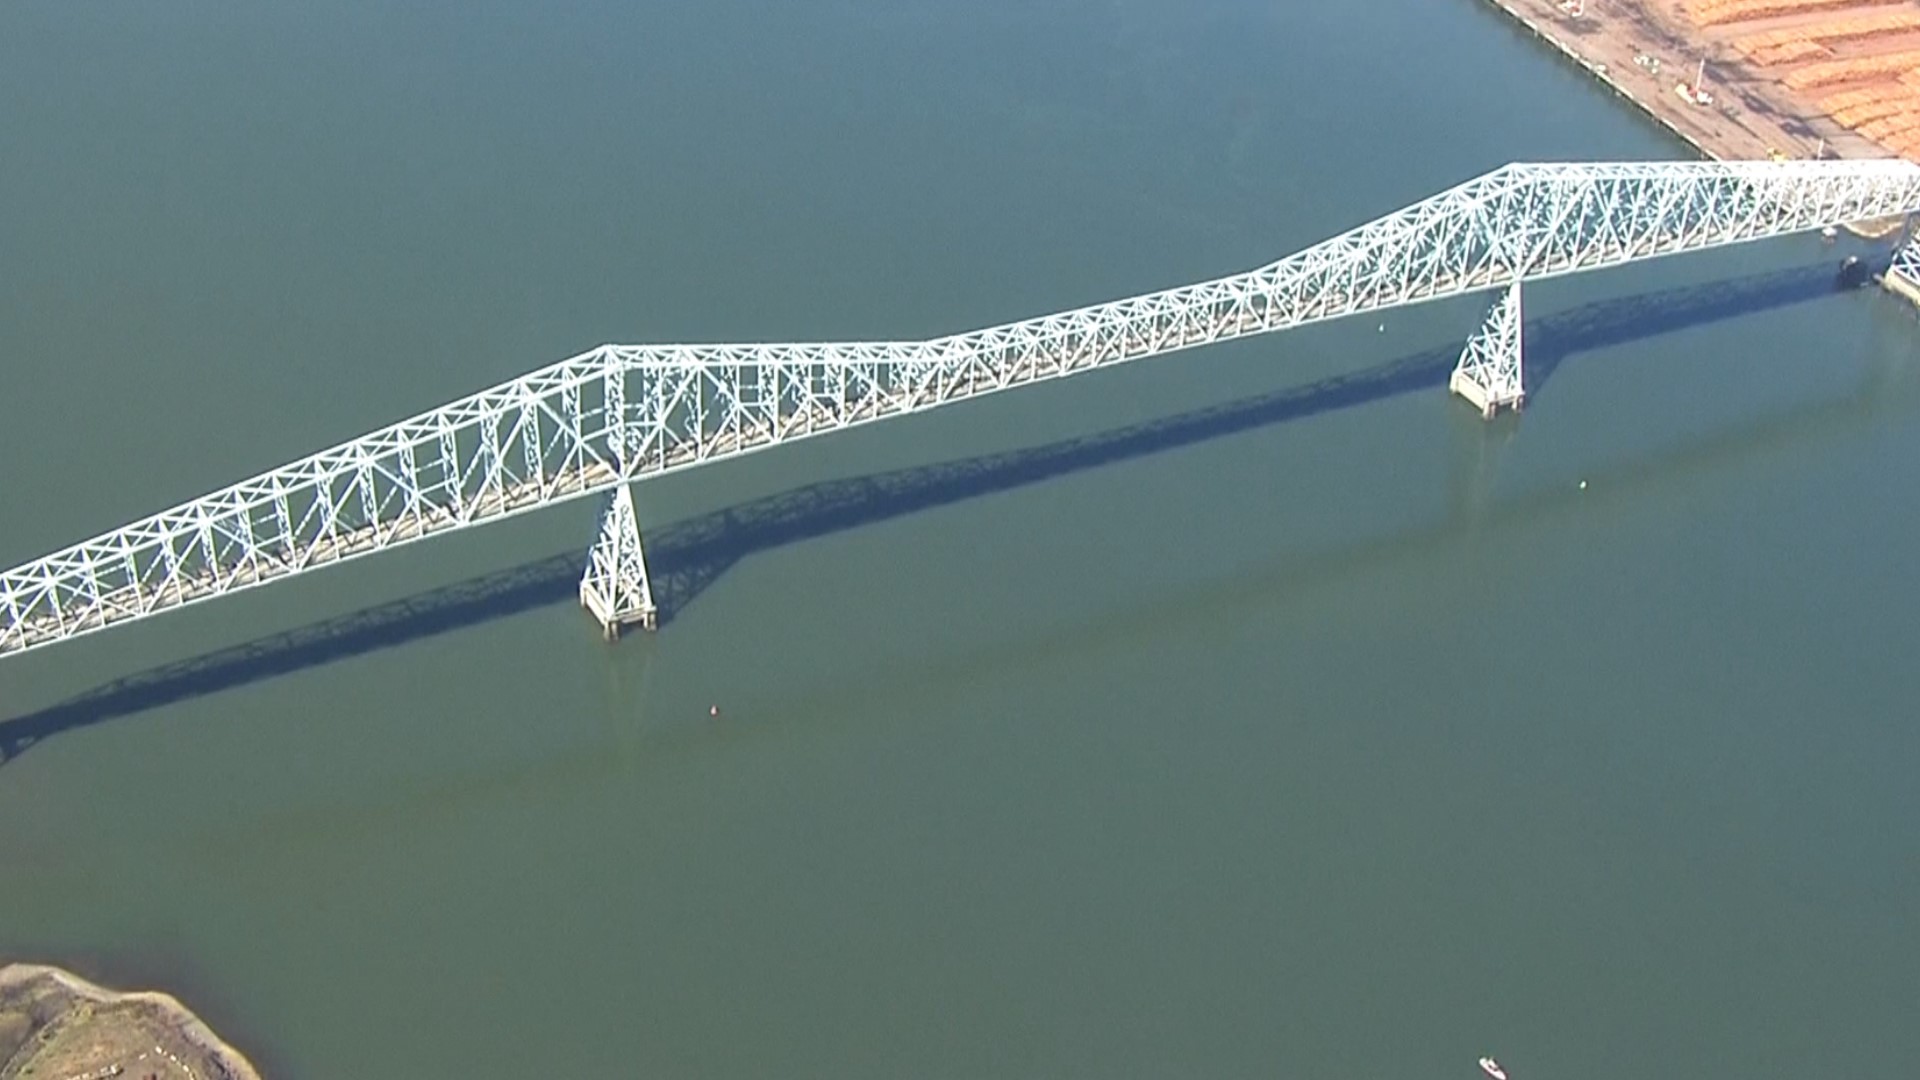 The Lewis and Clark Bridge, or Longview-Rainier Bridge, will be closed up to eight days starting Sunday at 8 p.m. The bridge will be closed so work crews can replace